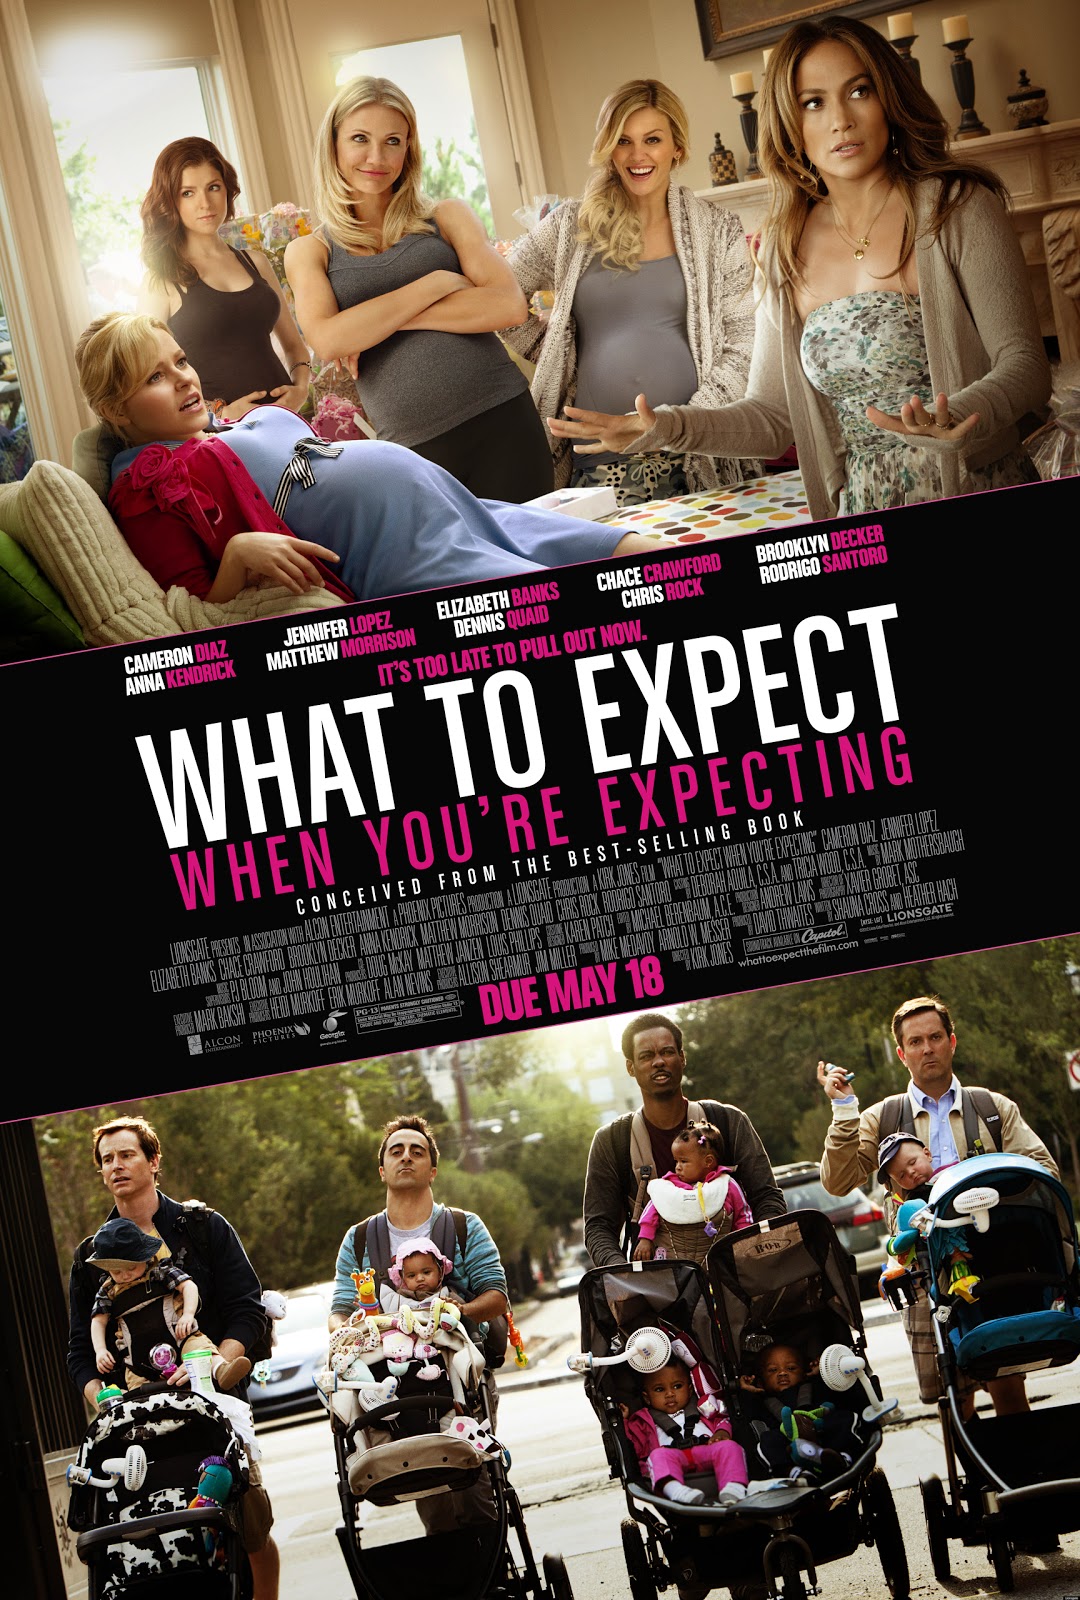 WHAT TO EXPECT WHEN YOURE EXPECTING MOVIE 